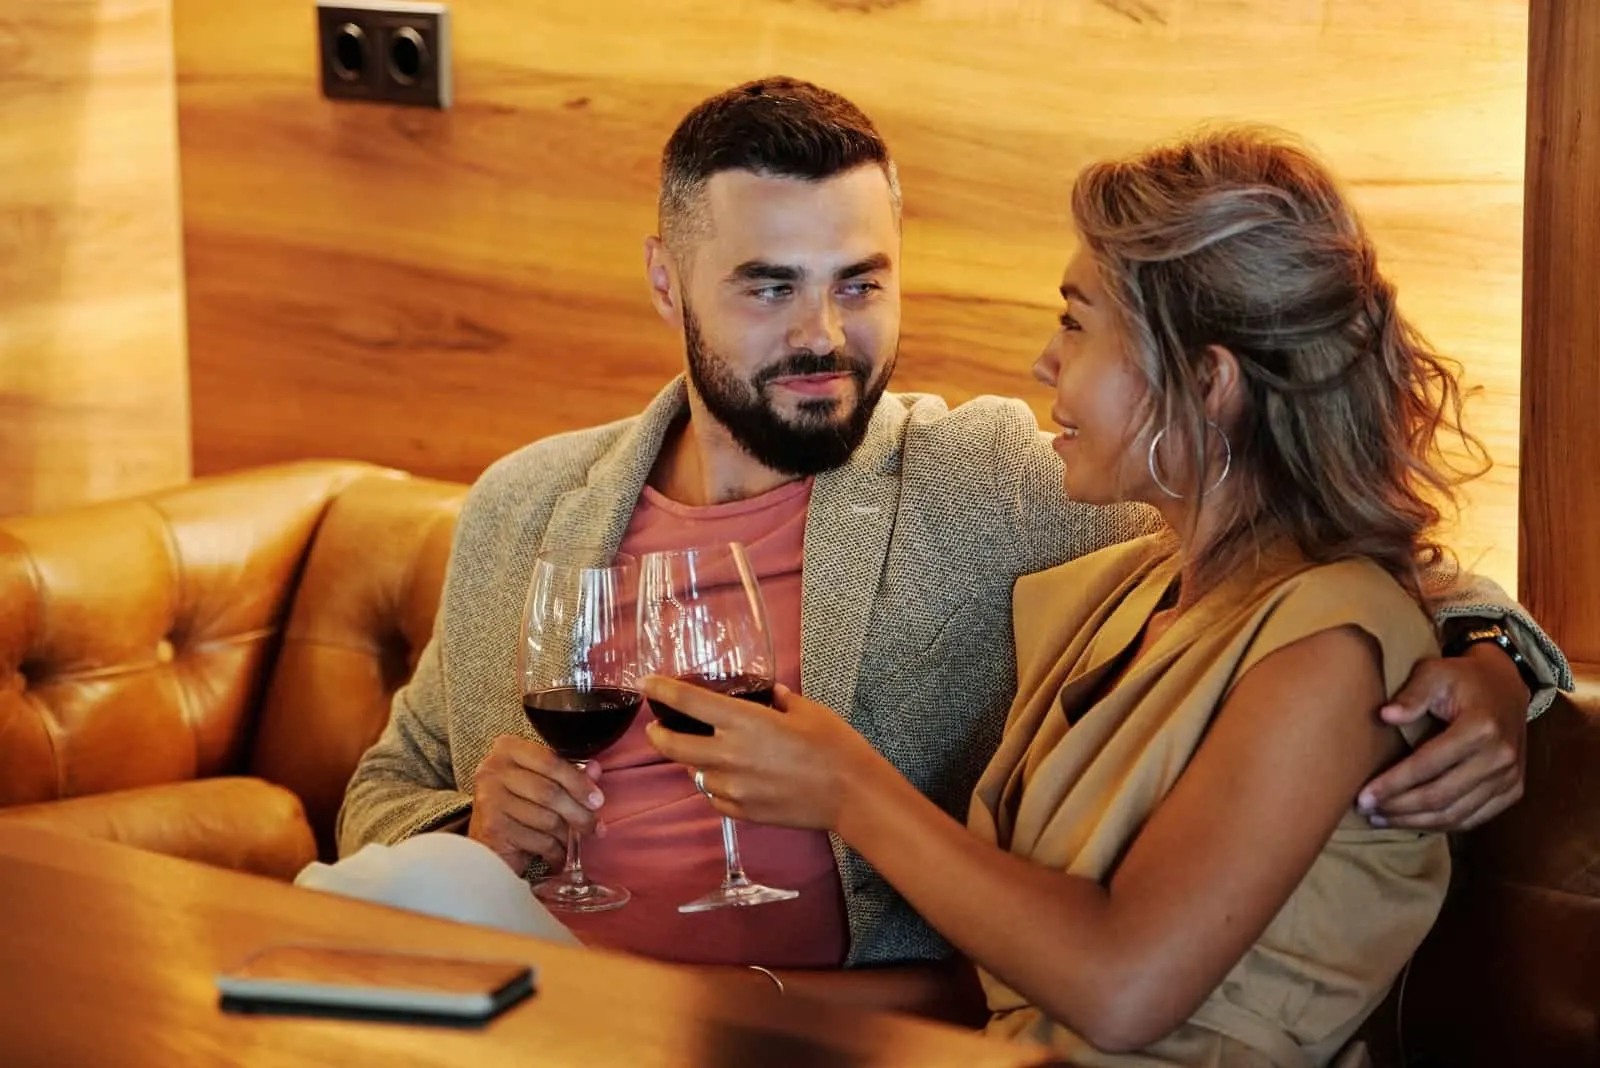 man and woman making eye contact while holding wine glasses